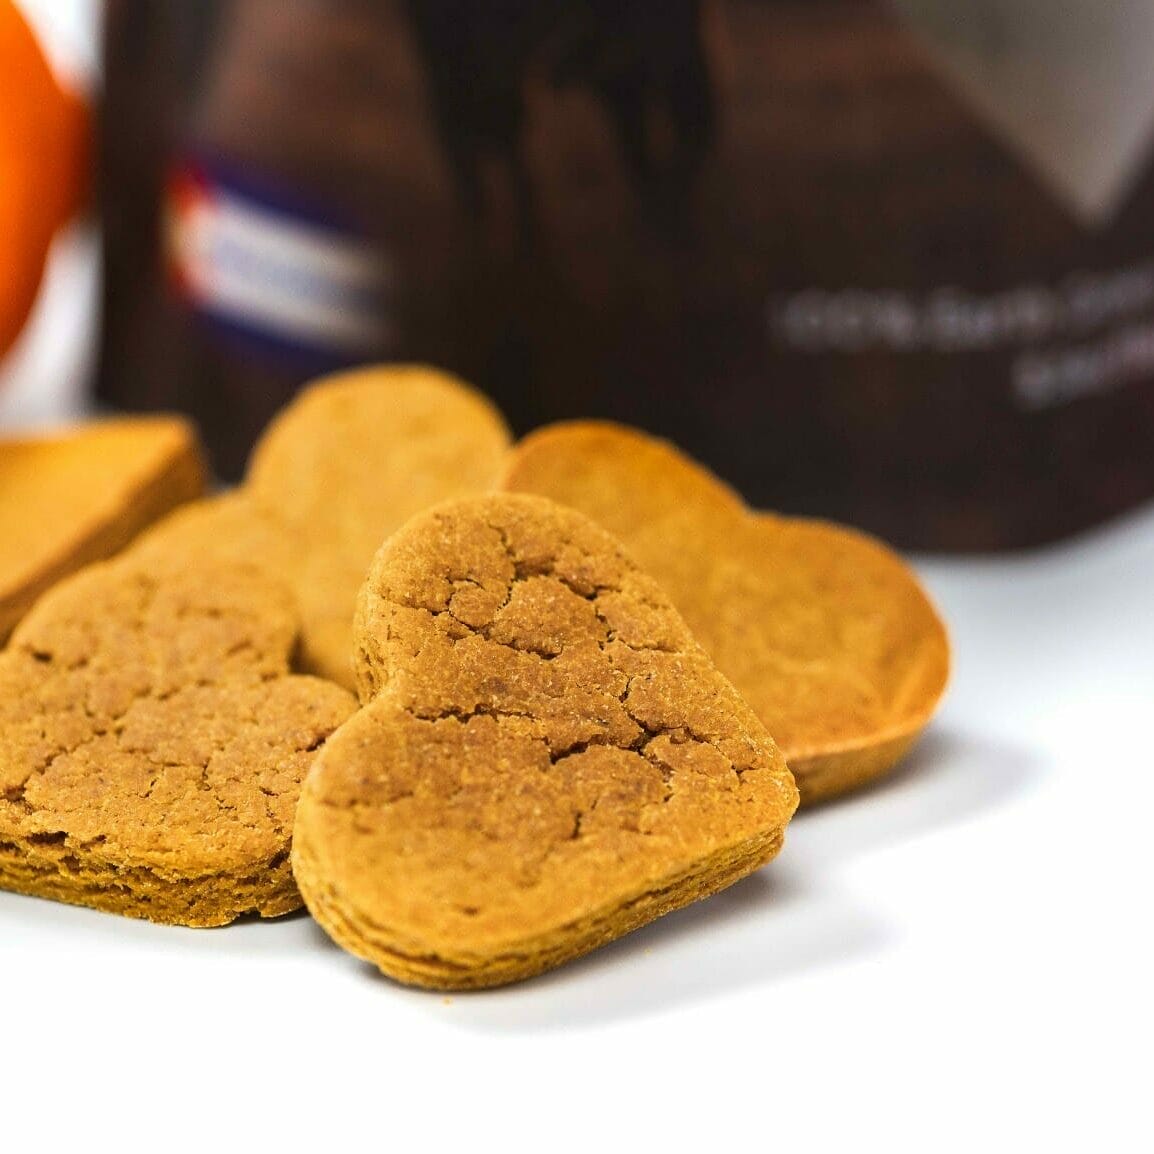 Earth Buddy Pumpkin CBD treats for dogs in a pile next to a pumpkin and bag of Hemp Hearts. Earth Buddy CBD treats for dogs are a great limited ingredient treat option for dog anxiety.